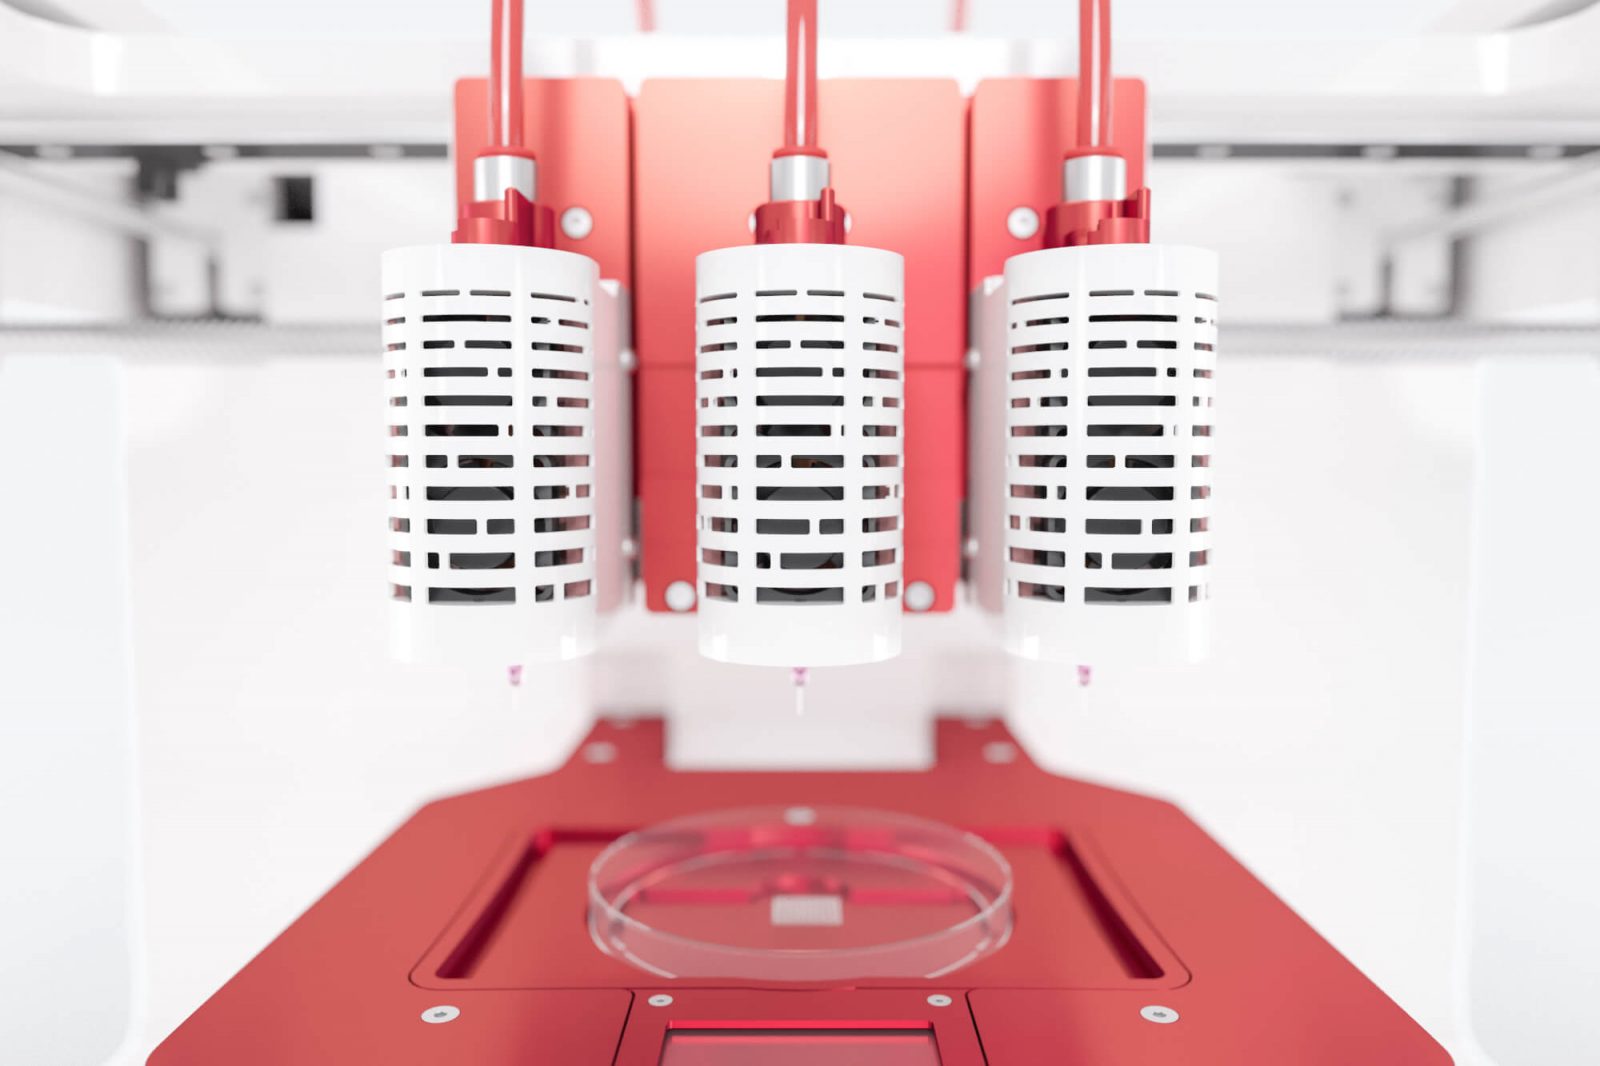 Resetting Autocalibration Height - Allevi 3 bioprinter extruders